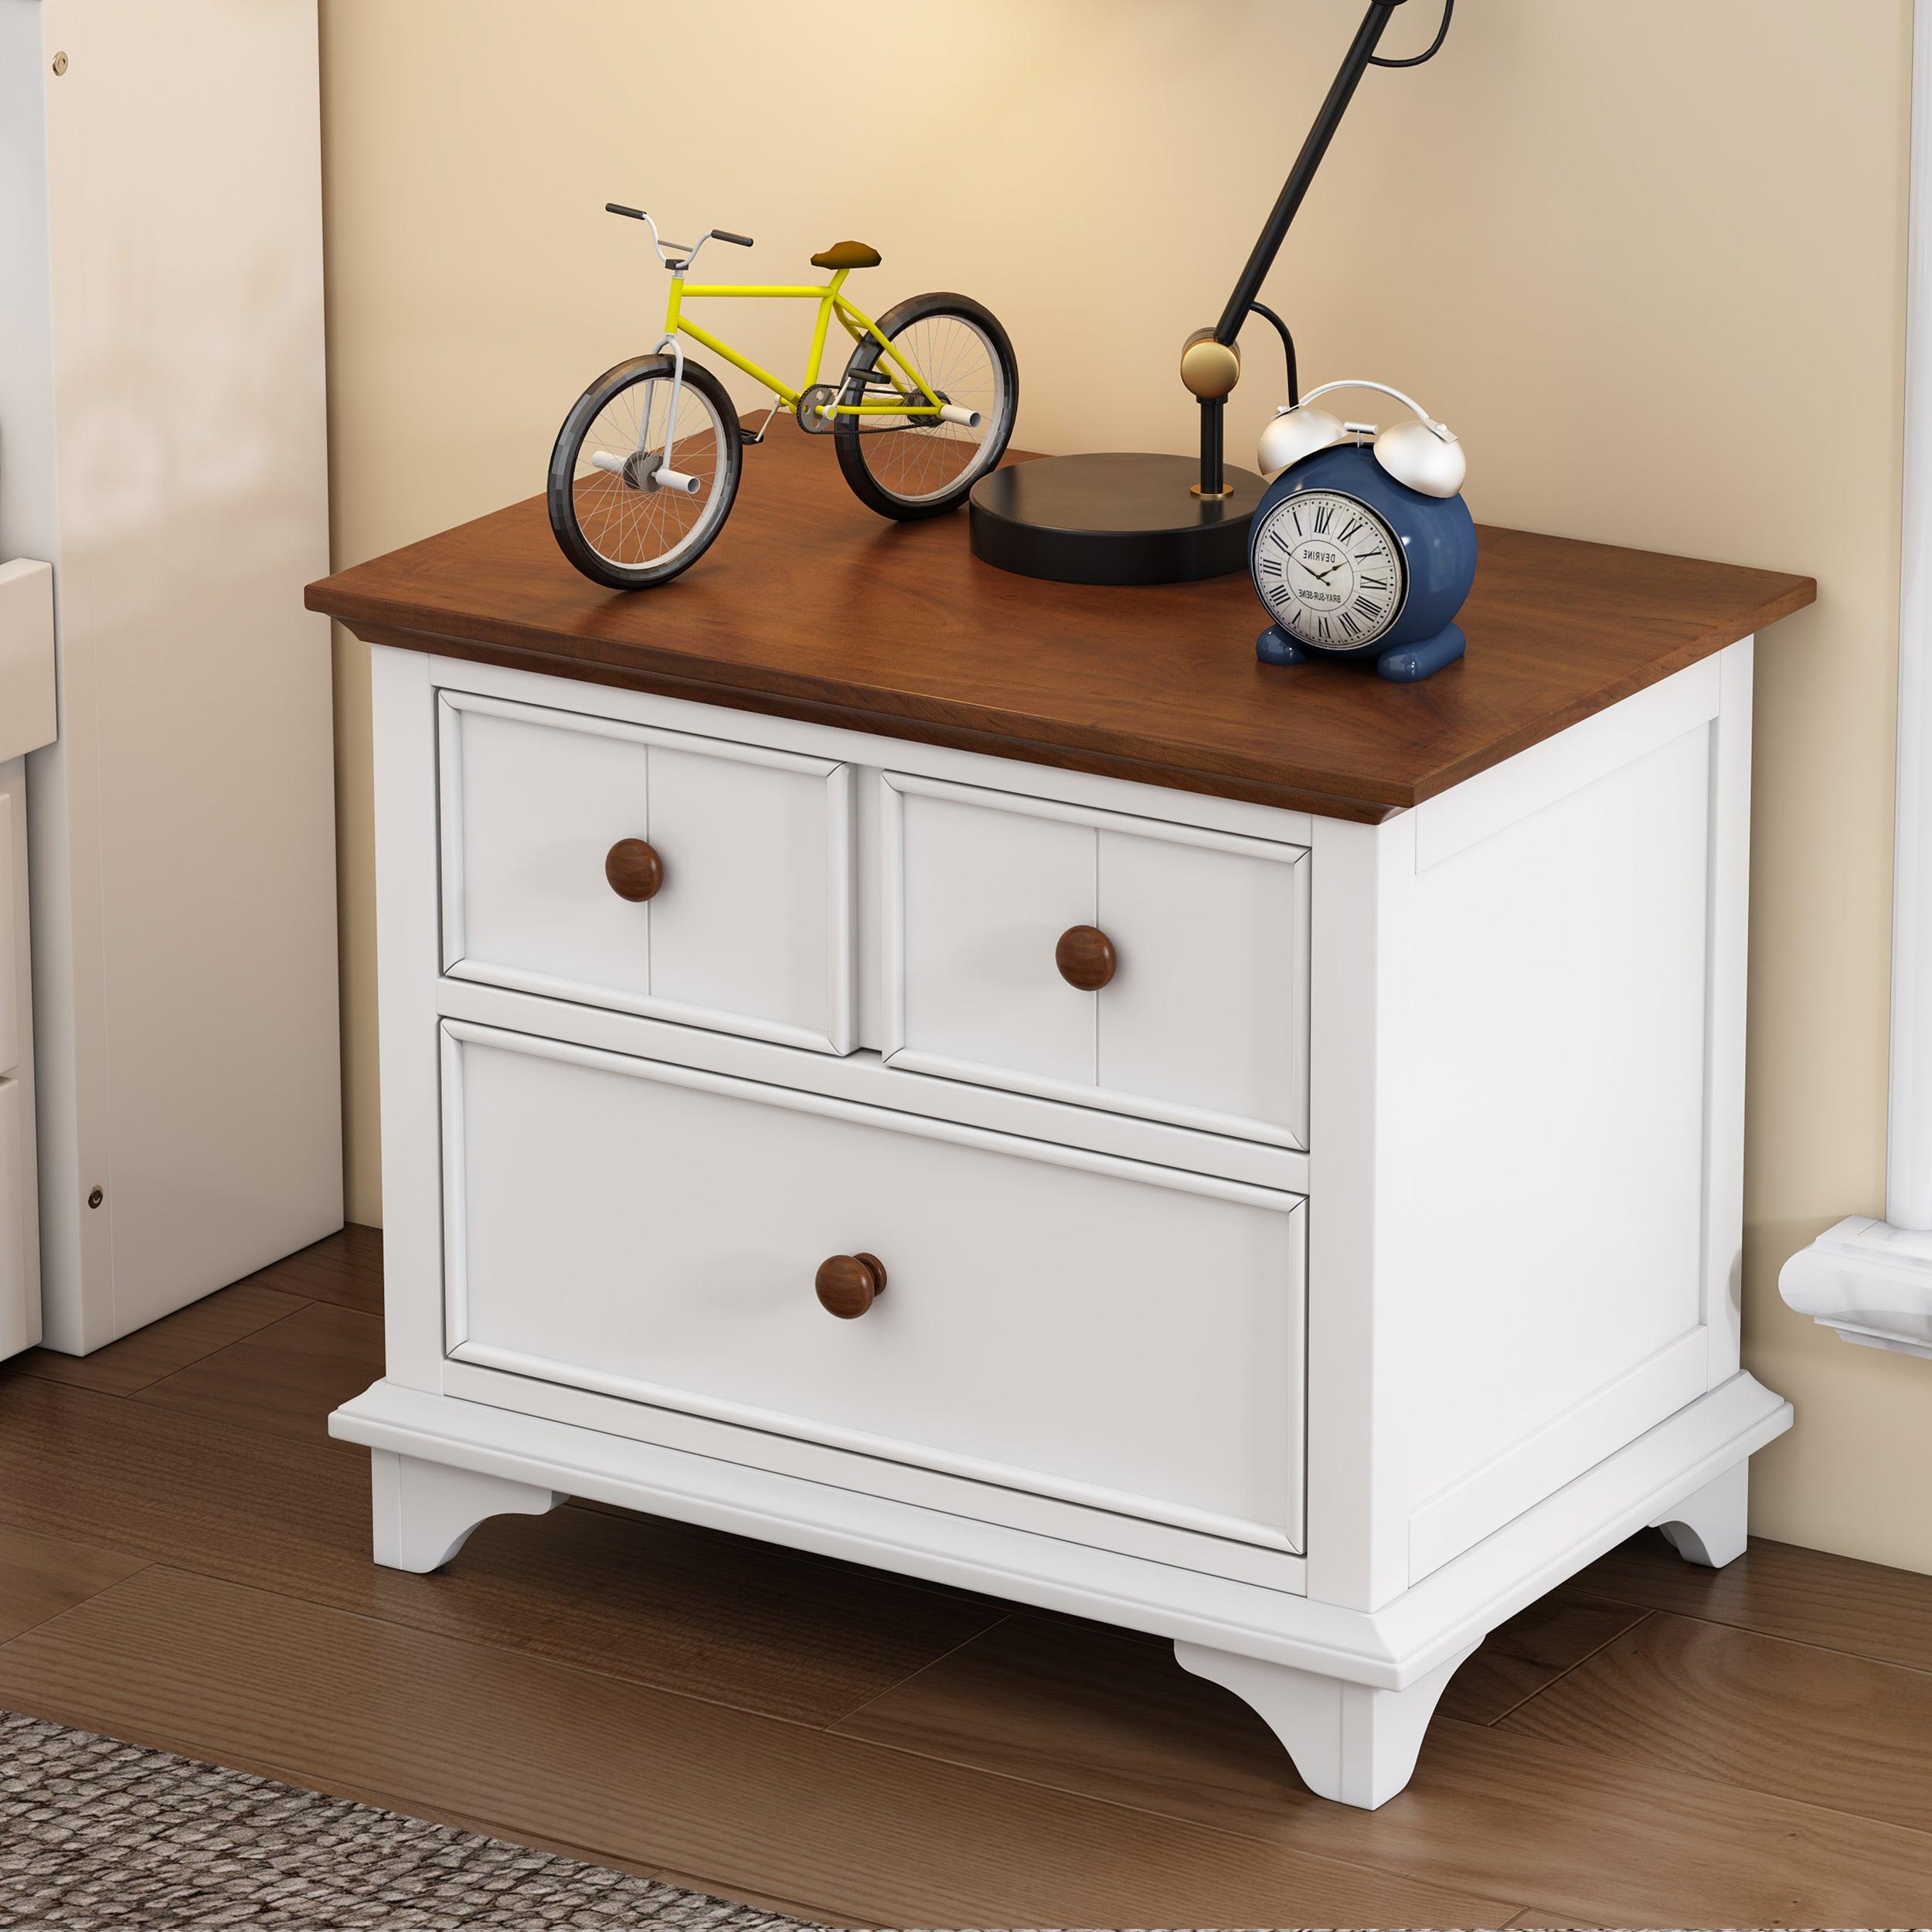 🆓🚛 Icehot Two-Drawer Nightstand for Bedroom - White+Walnut